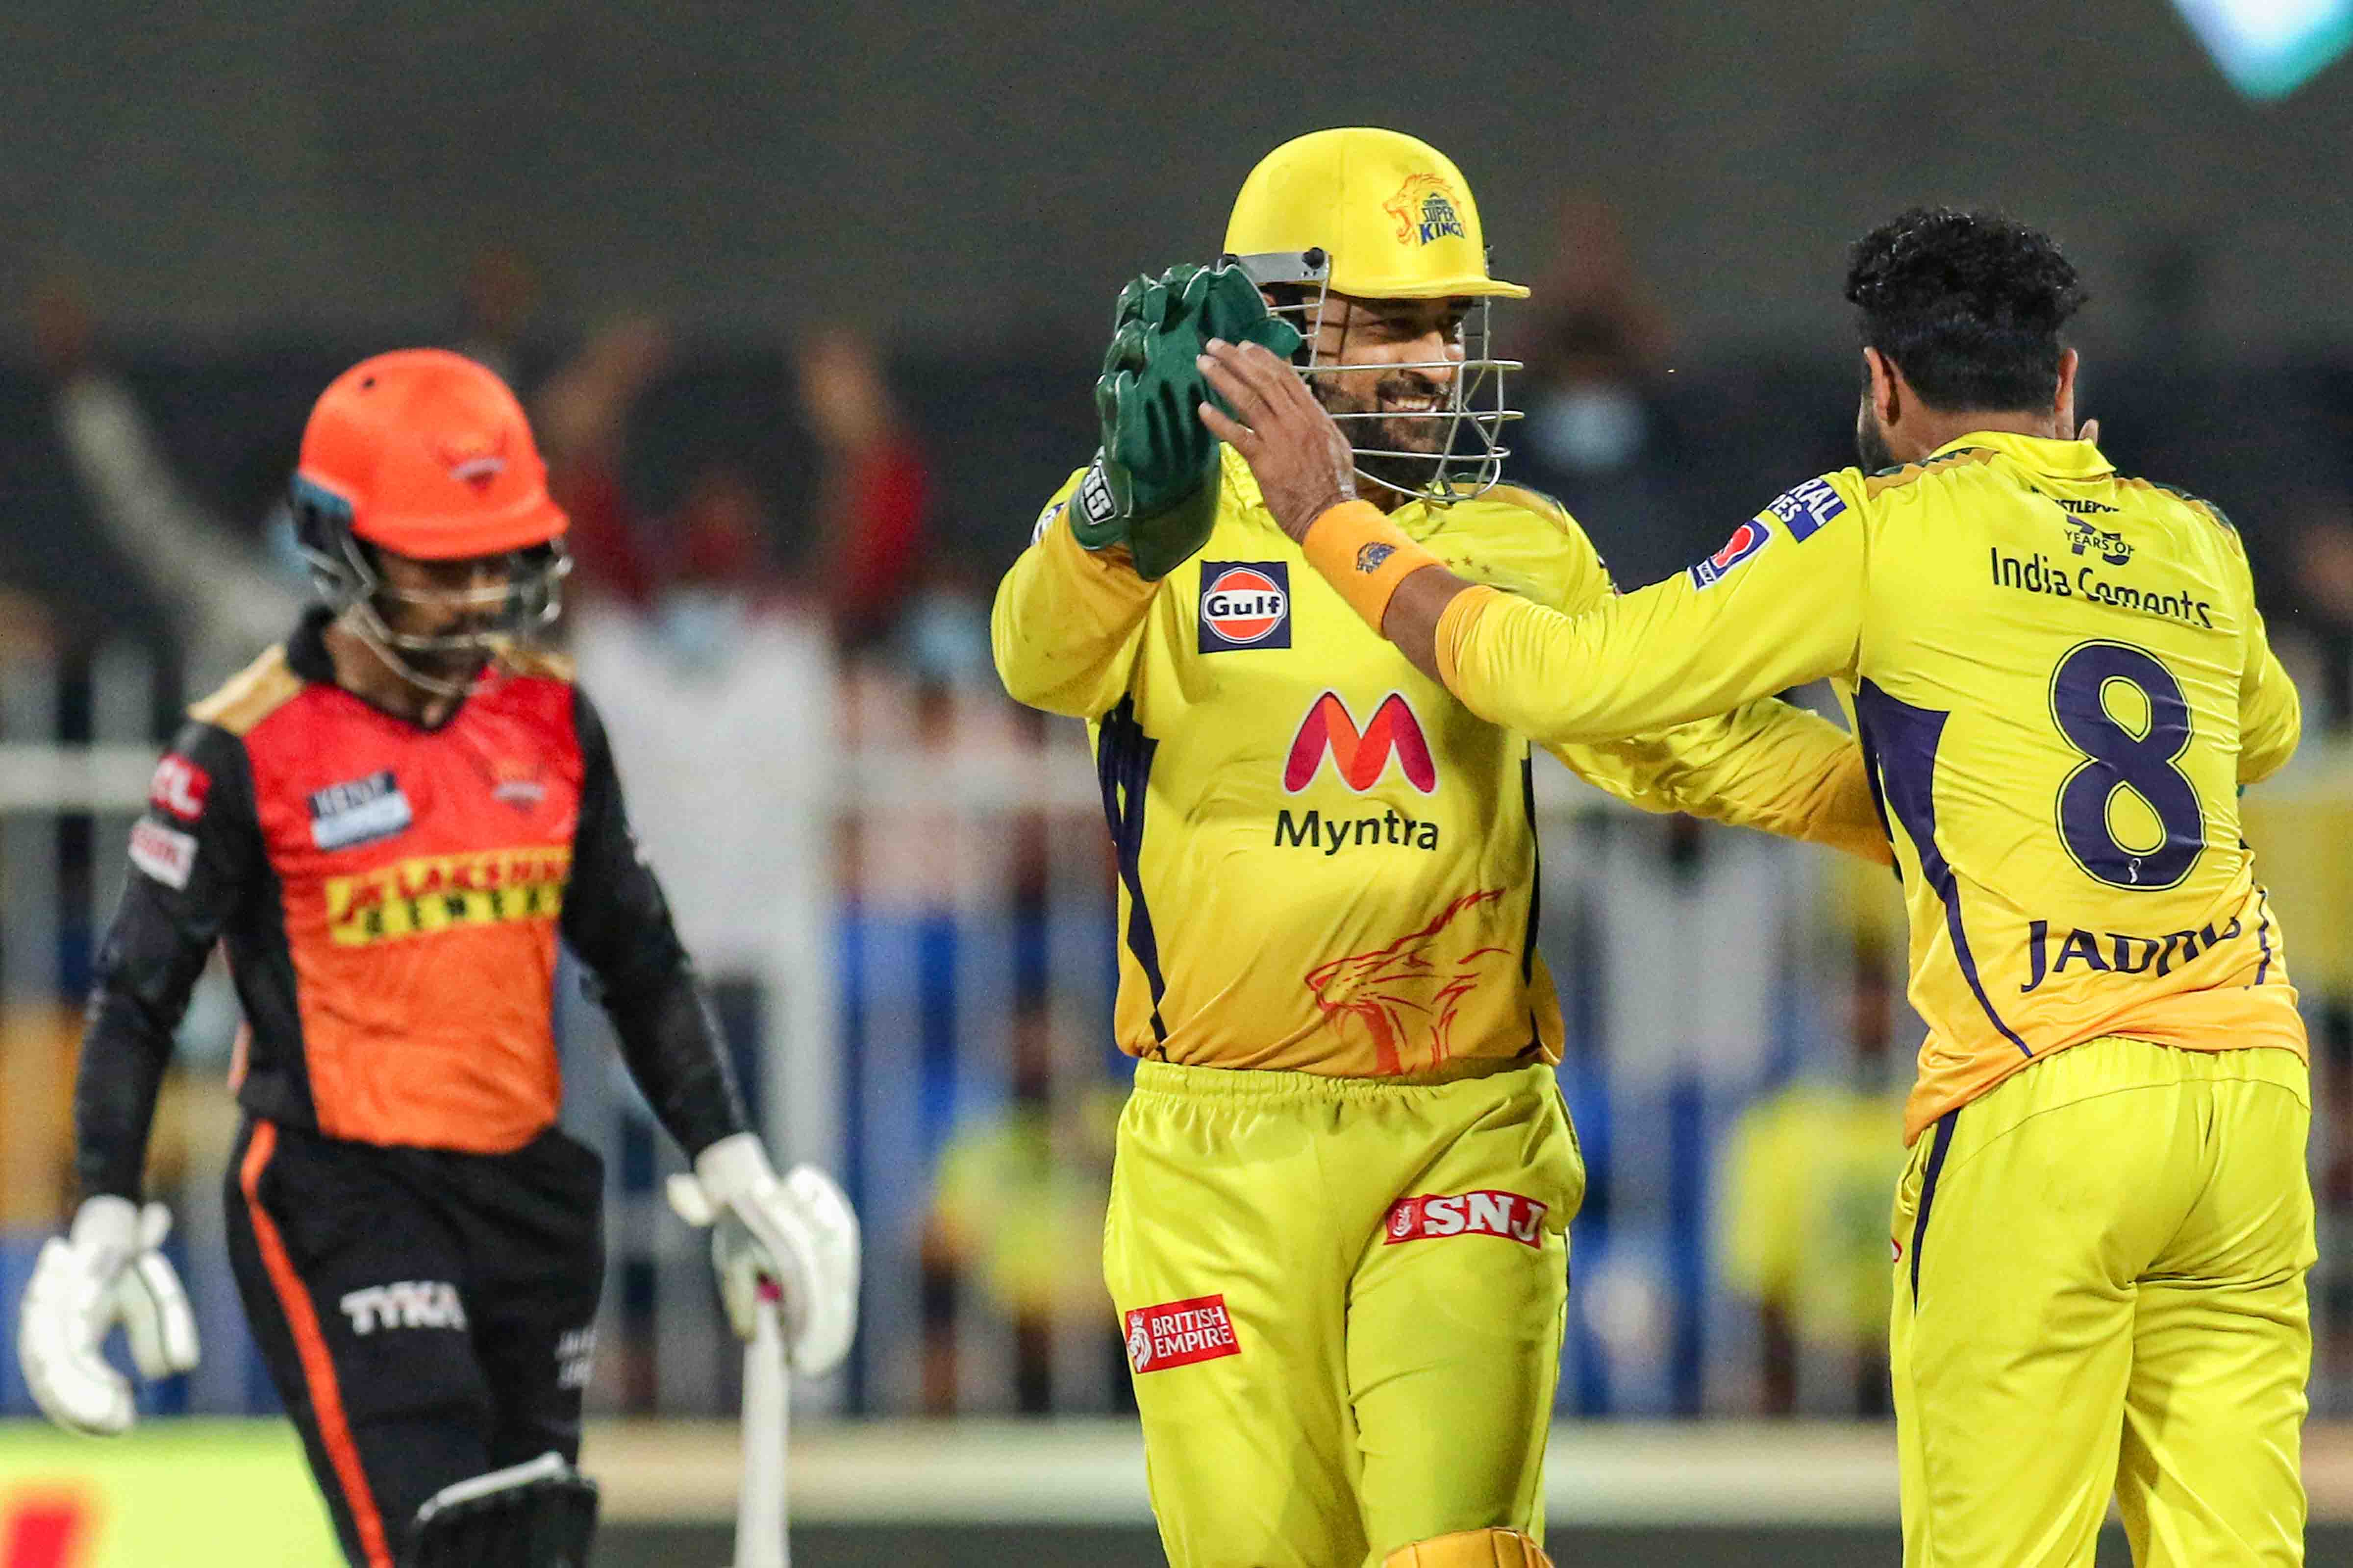 CSK limit SRH to 134/7 on slow Sharjah surface